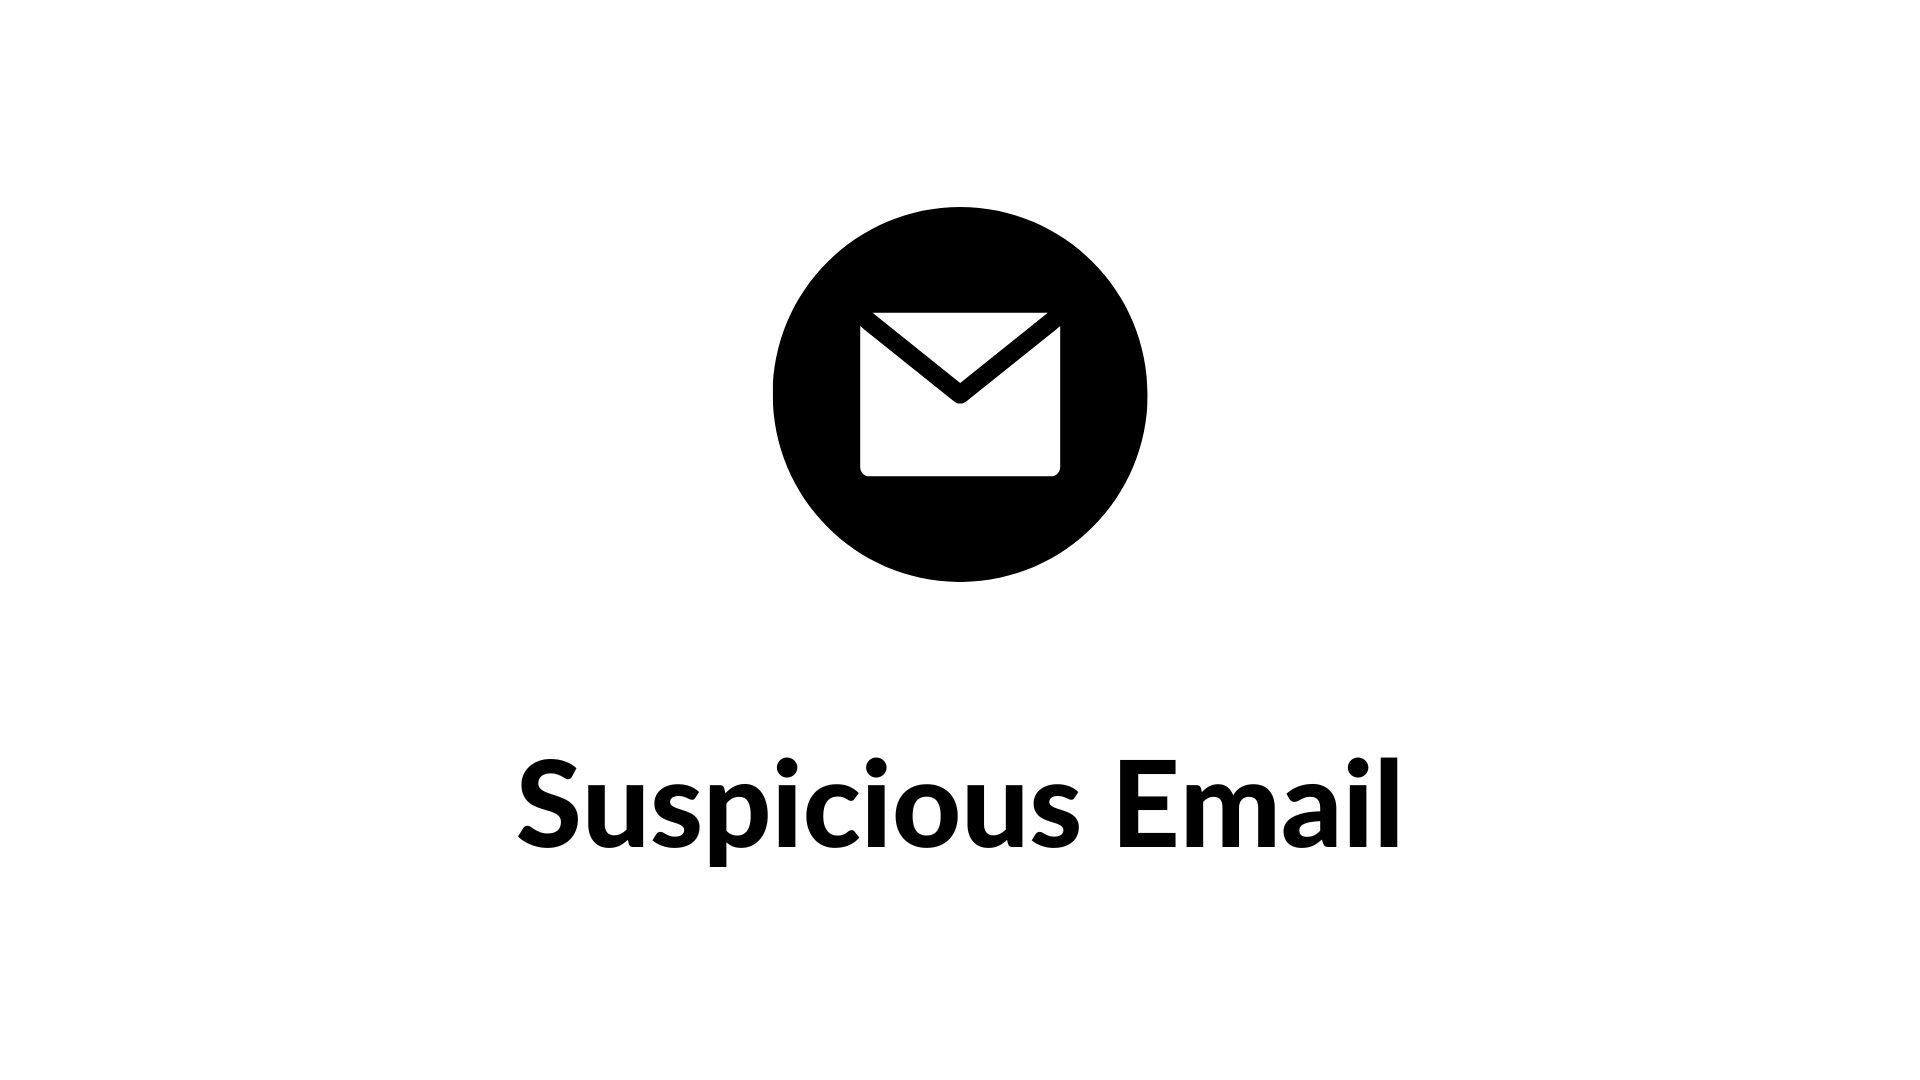 Do NOT open attachments of suspicious emails